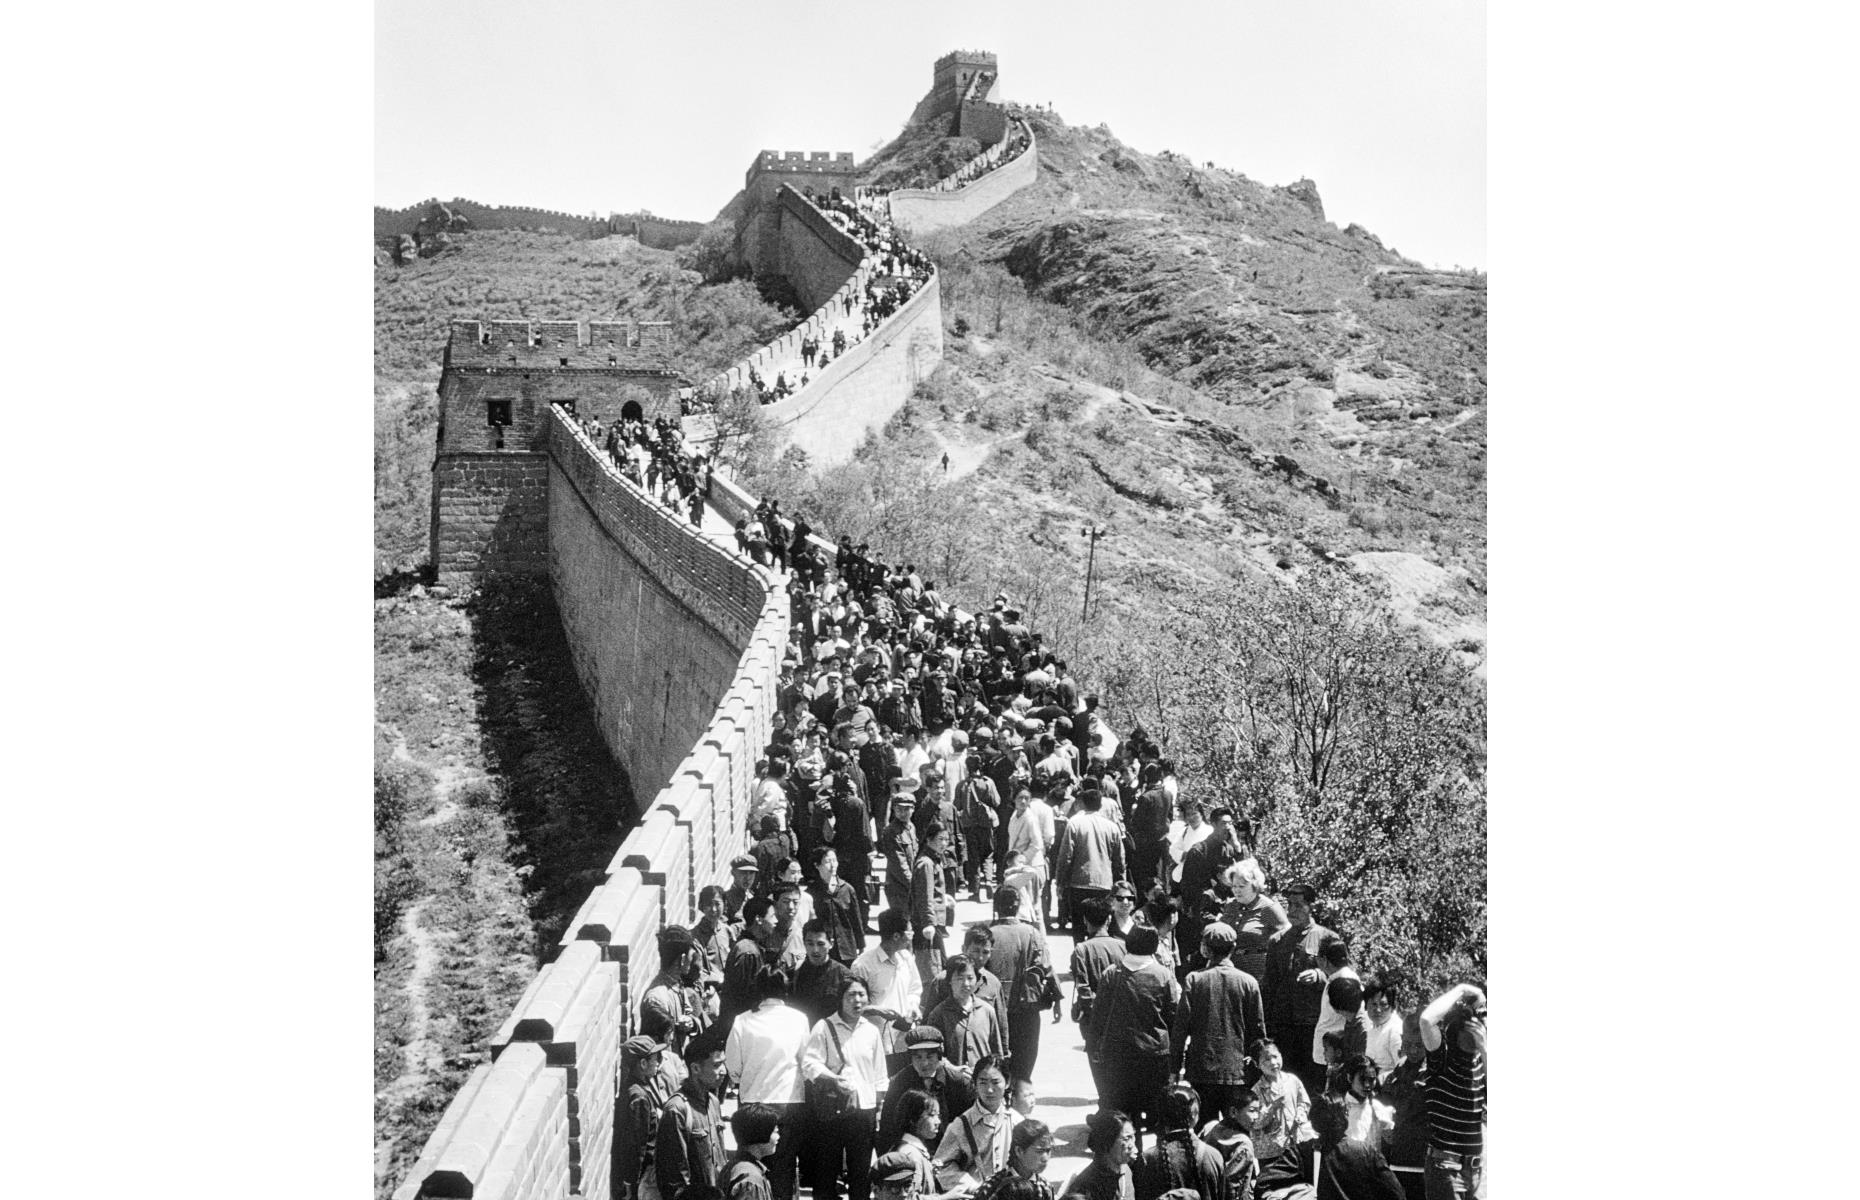 It turns out overcrowding at the Great Wall of China is nothing new – if this photograph from the 1970s is anything to go by. The landmark, which has an official length of 13,170 miles (21,196km), was mainly built during the Ming dynasty, which lasted between 1368 and 1644. In 2018, the most popular section of the Great Wall, Badaling, received more than 9.9 million visitors, reaching 80,000 a day during peak season.